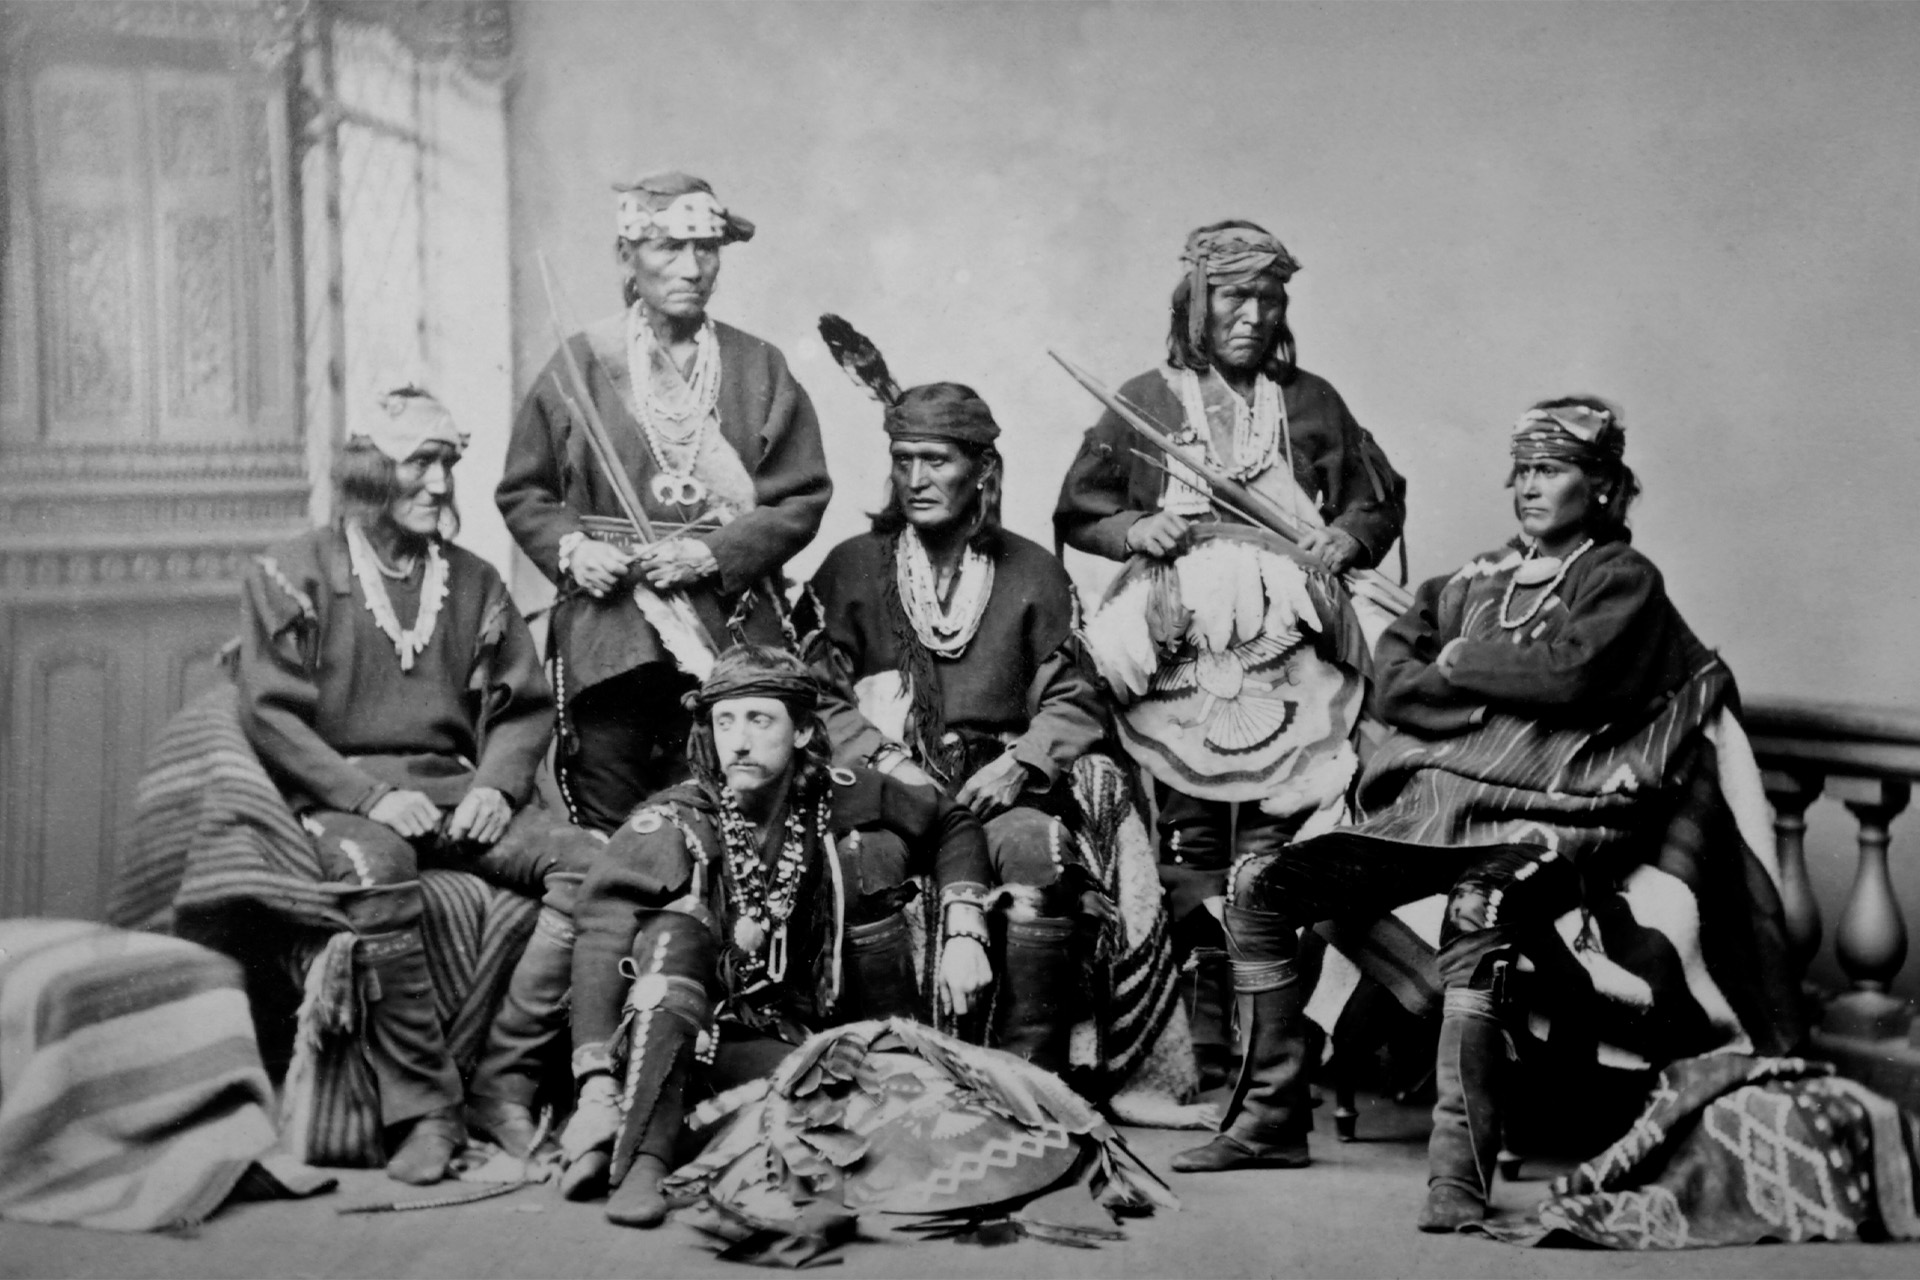 A black and white photo of a group of Zuni leaders posing for a photo.